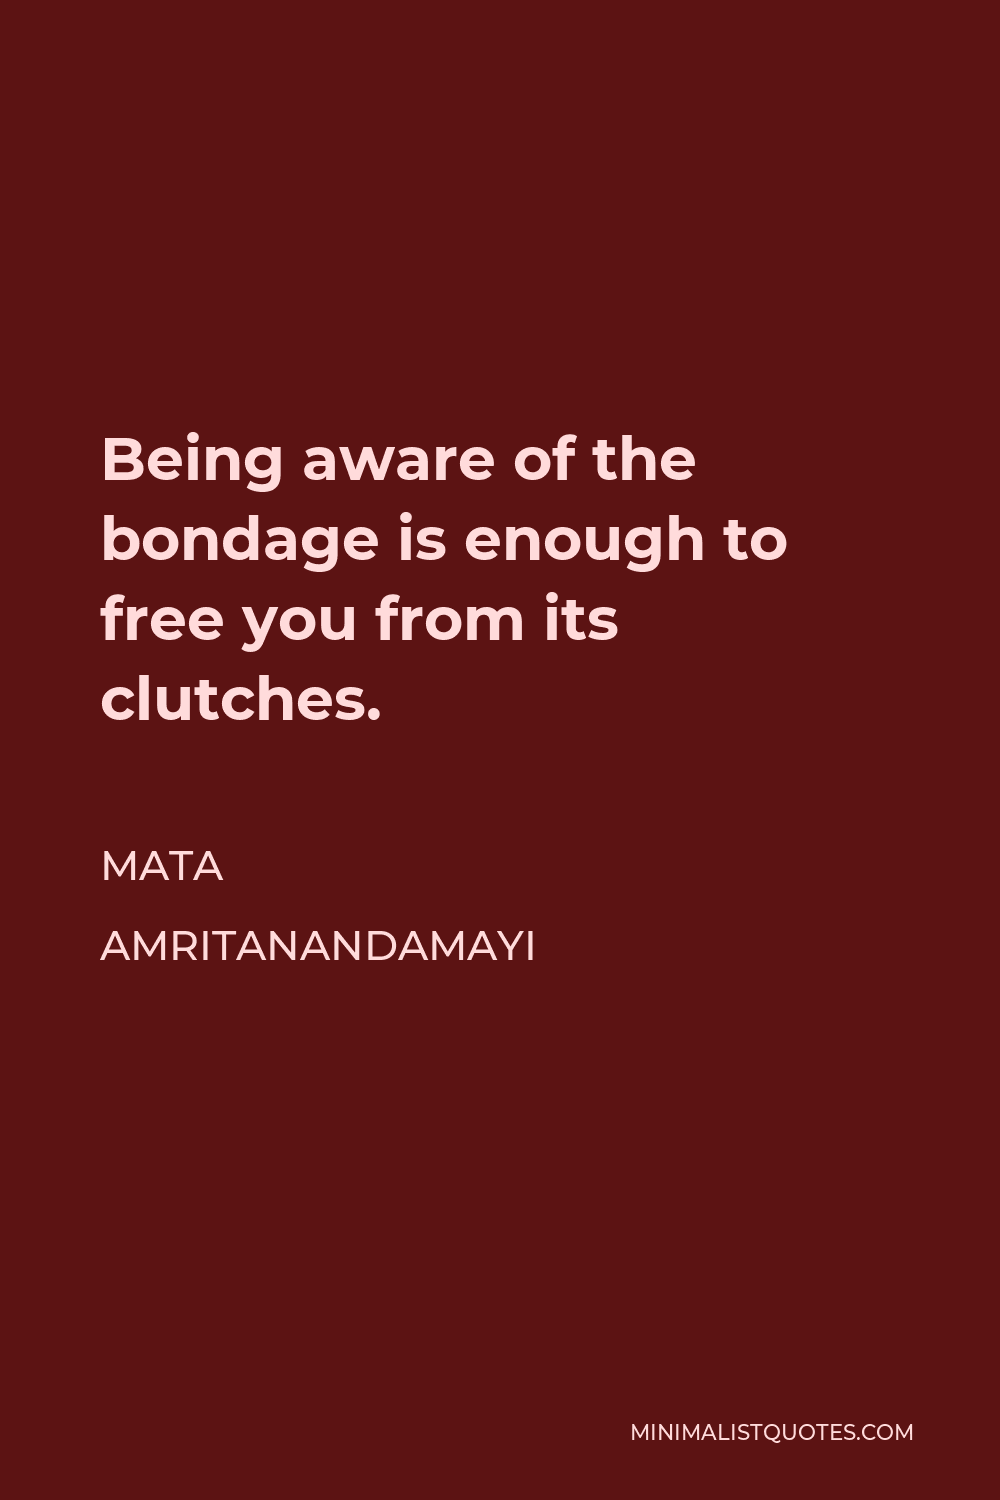 Mata Amritanandamayi Quote - Being aware of the bondage is enough to free you from its clutches.